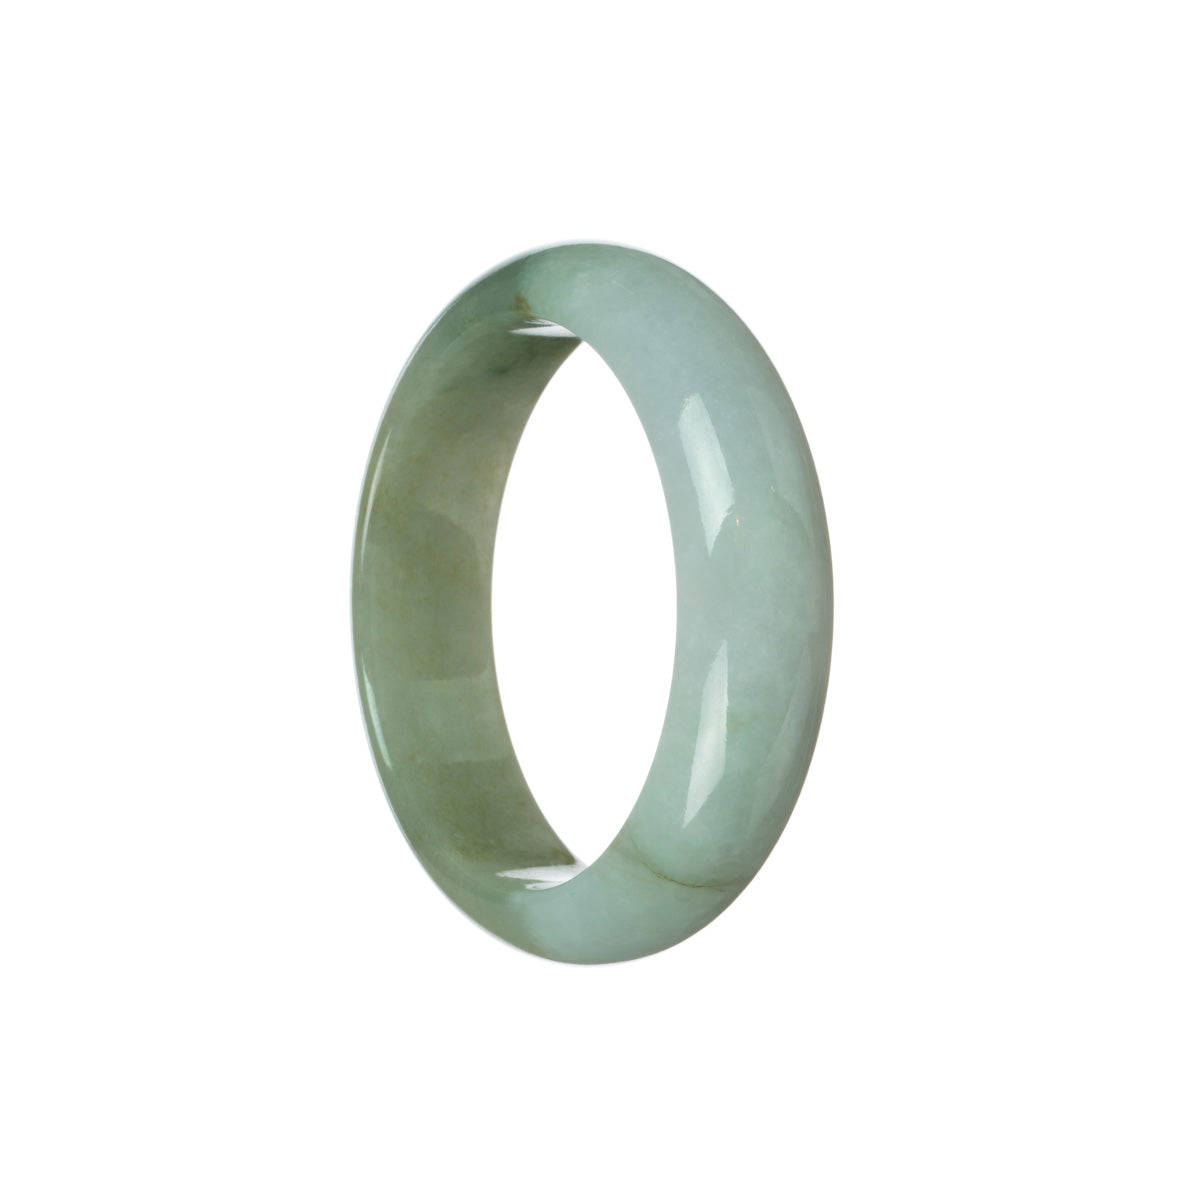 A close-up image of a bracelet made of genuine untreated green and pale lavender jadeite. The bracelet features a half moon shape and measures 53mm in size. Created by MAYS GEMS.